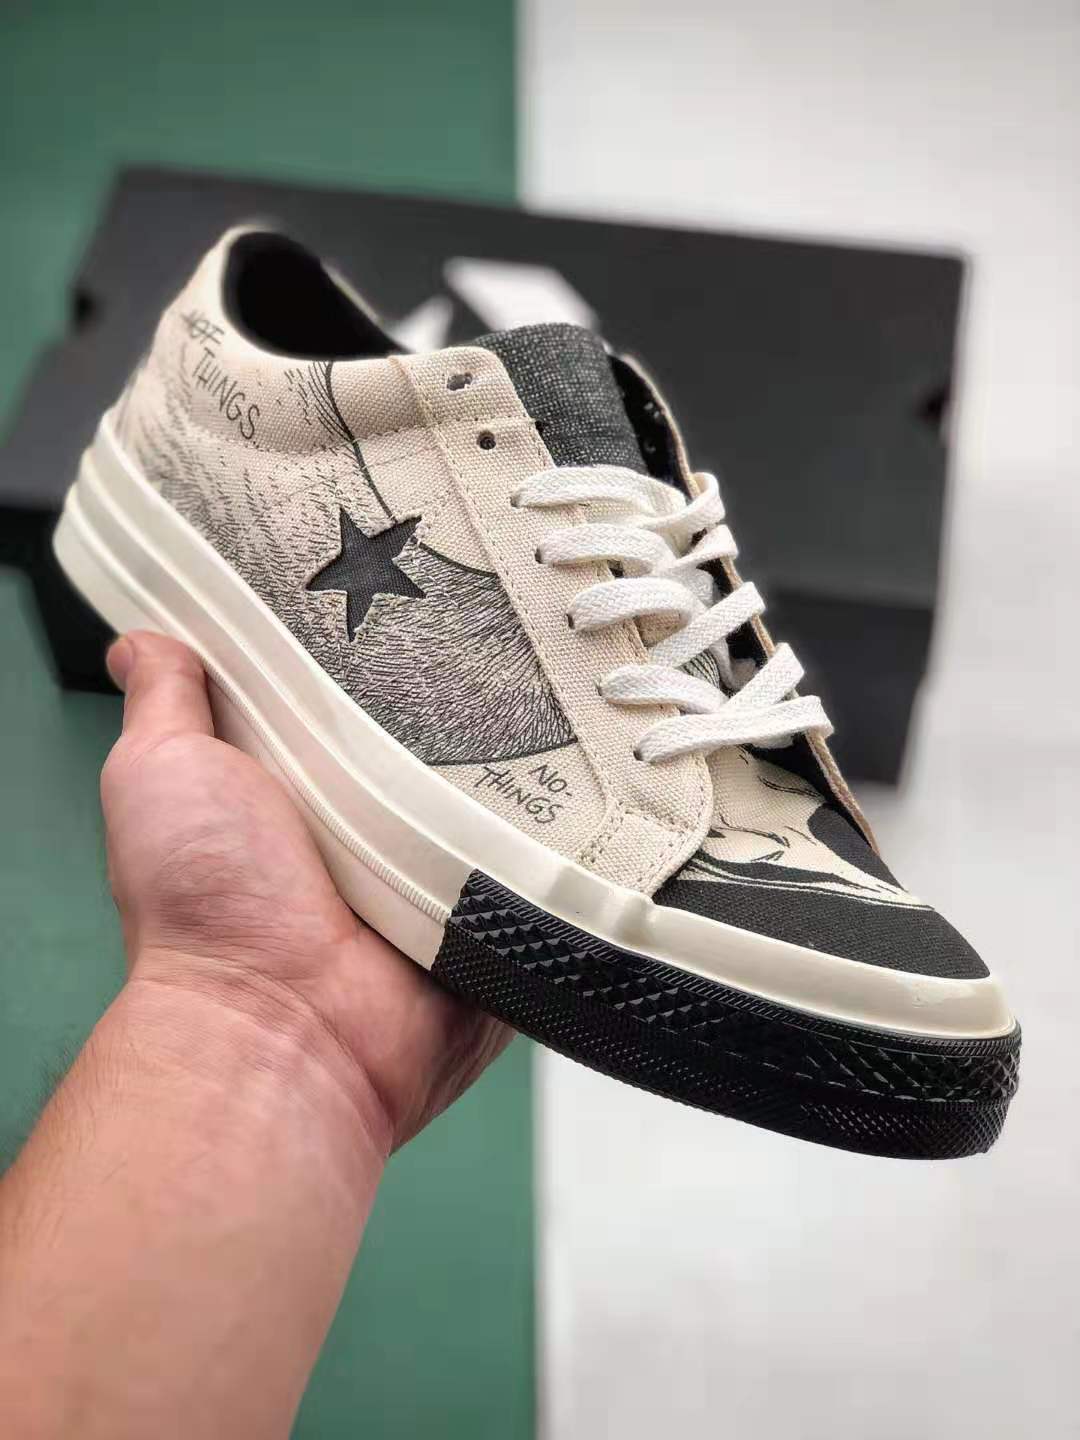 Converse Tyler, The Creator x Foot Locker x One Star 'Artist Series' 164533C - Limited Edition Collaboration